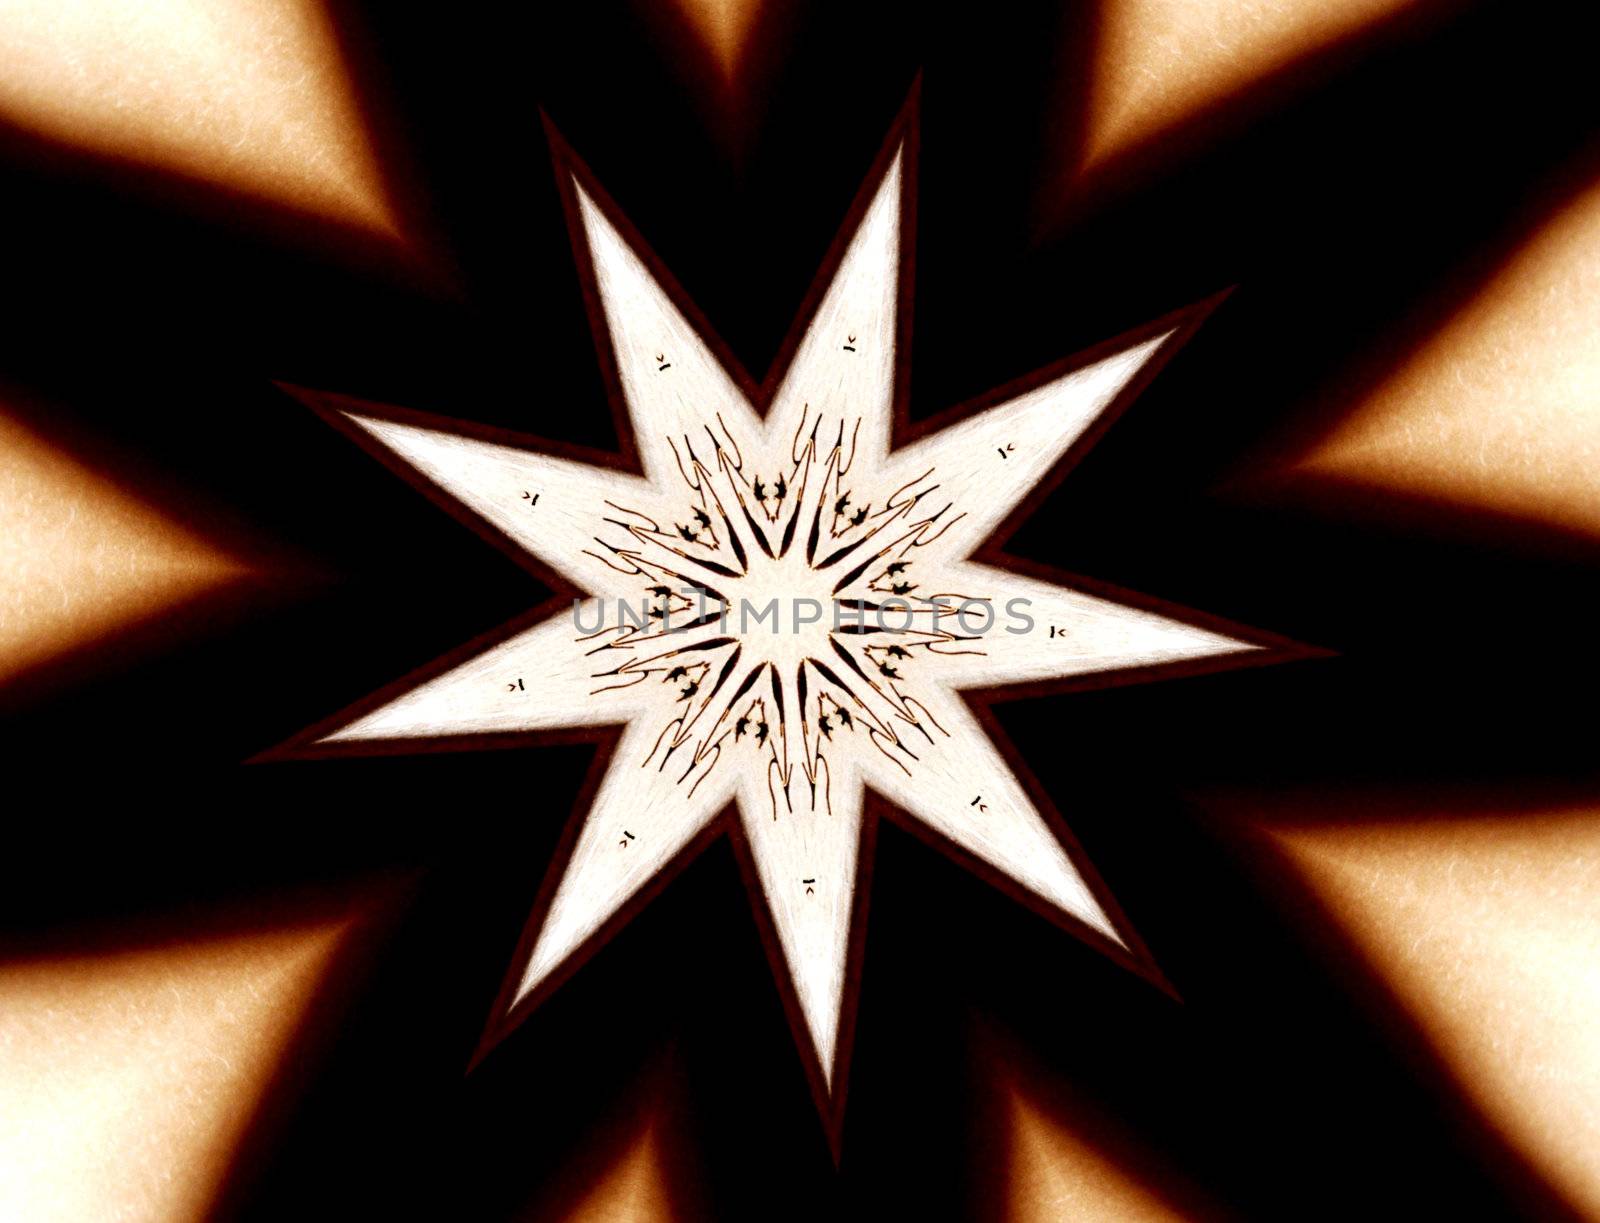 a nine-point star with complex patterns against a dark nine-point background